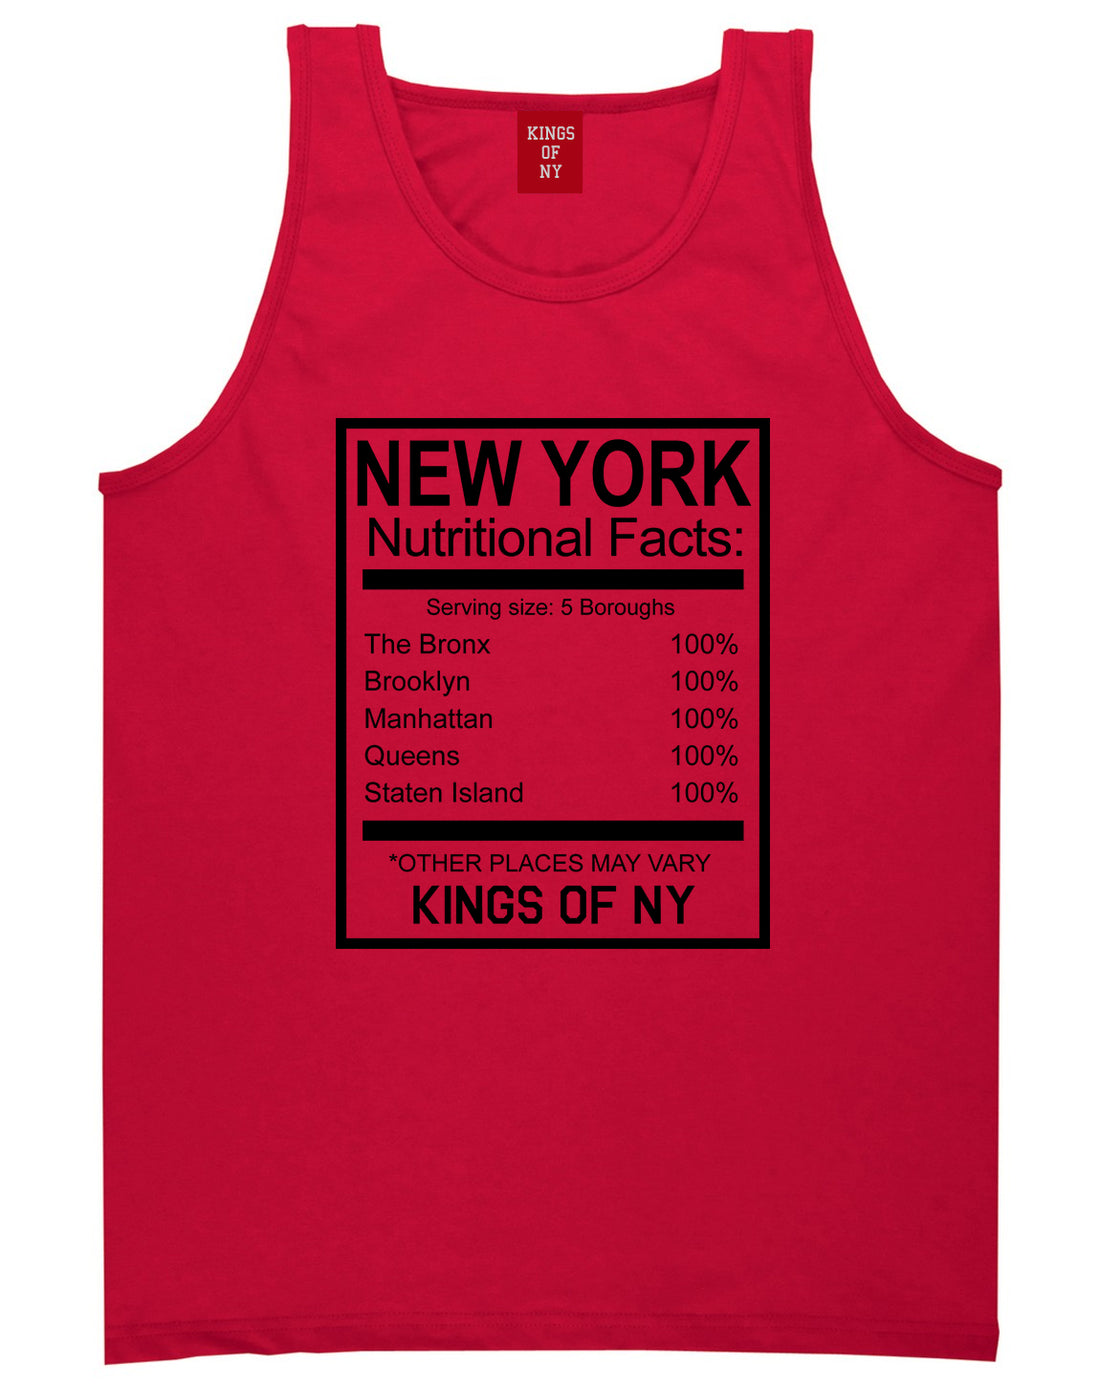 New York Nutritional Facts Tank Top Shirt in Red